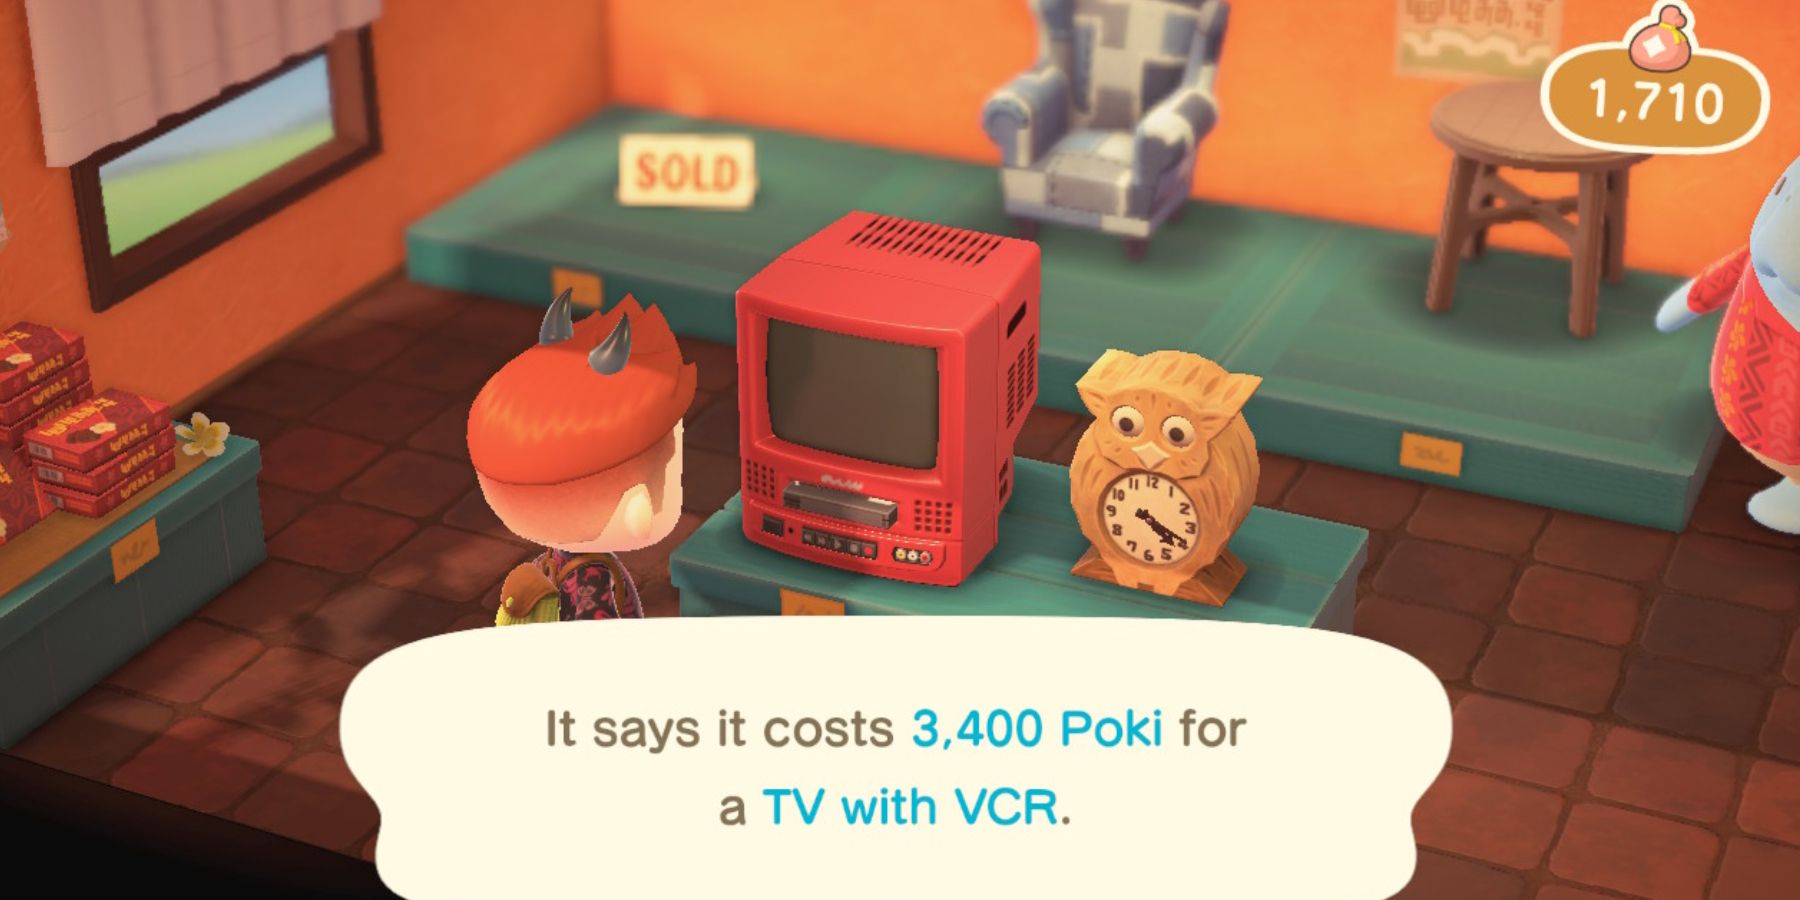 A player examines a TV-VCR combo on sale for Poki at the Happy Home Paradise DLC Office Shop in Animal Crossing: New Horizons